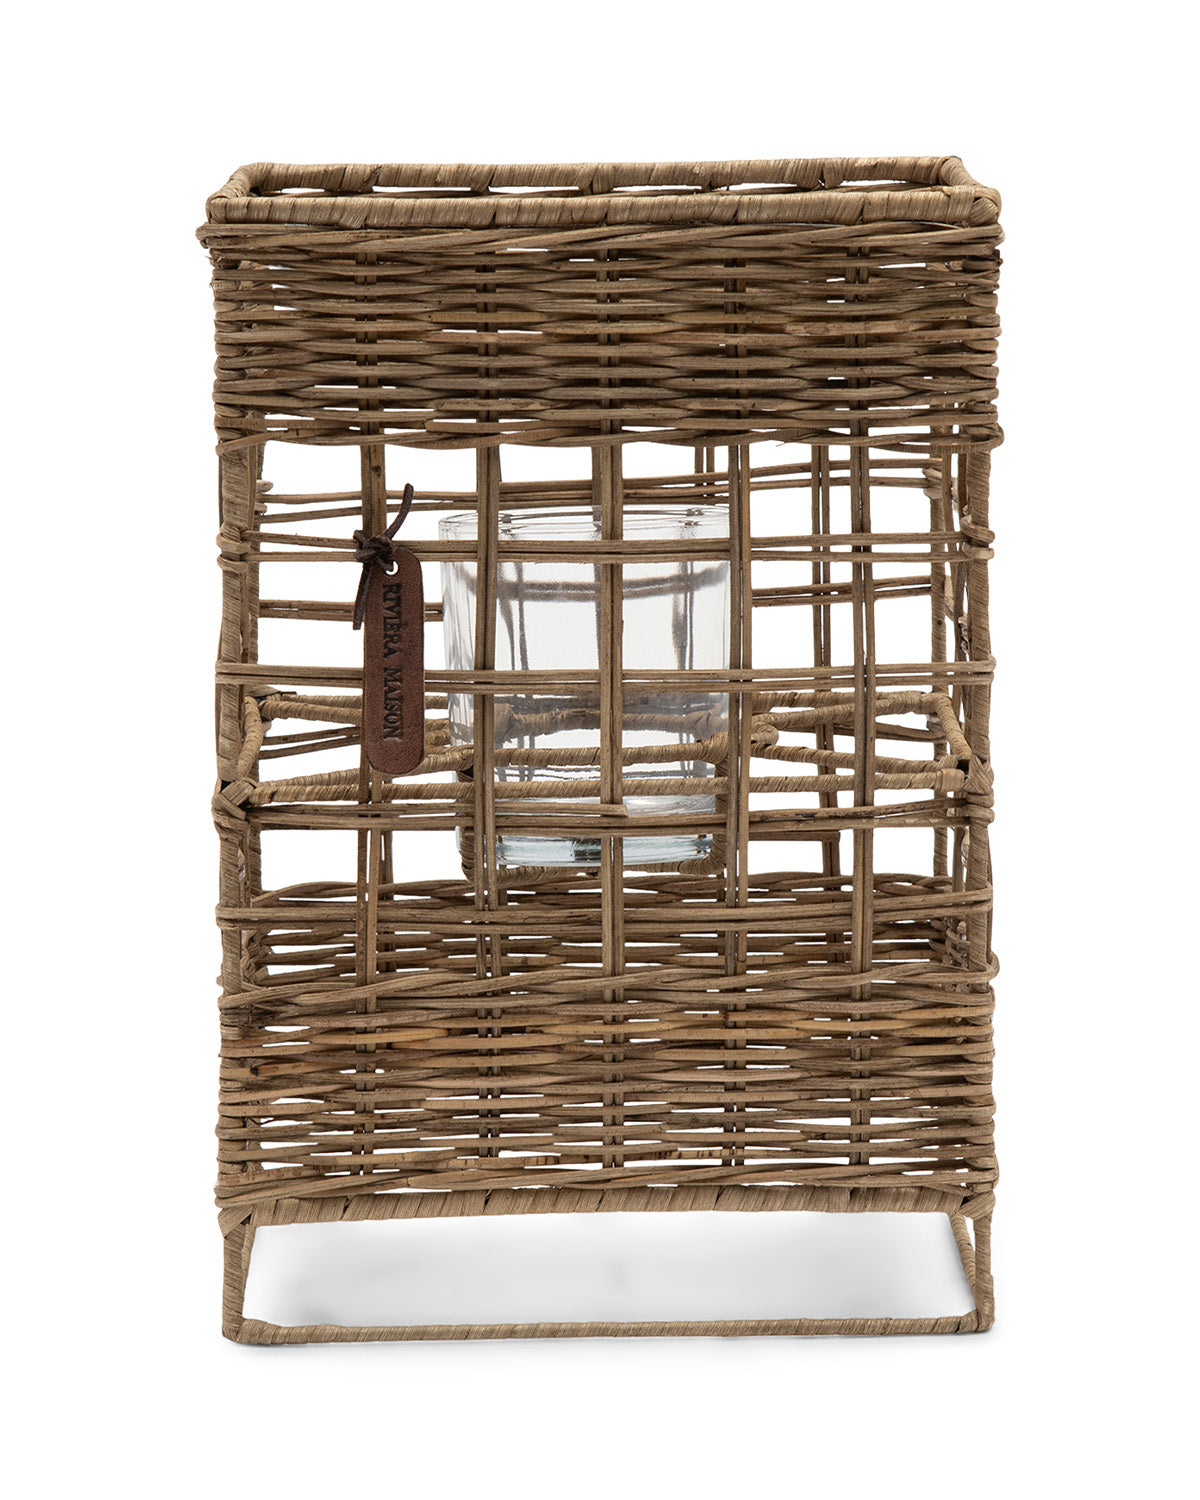 HURRICANE lamp made of woven rustic Rattan by Riviera Maison